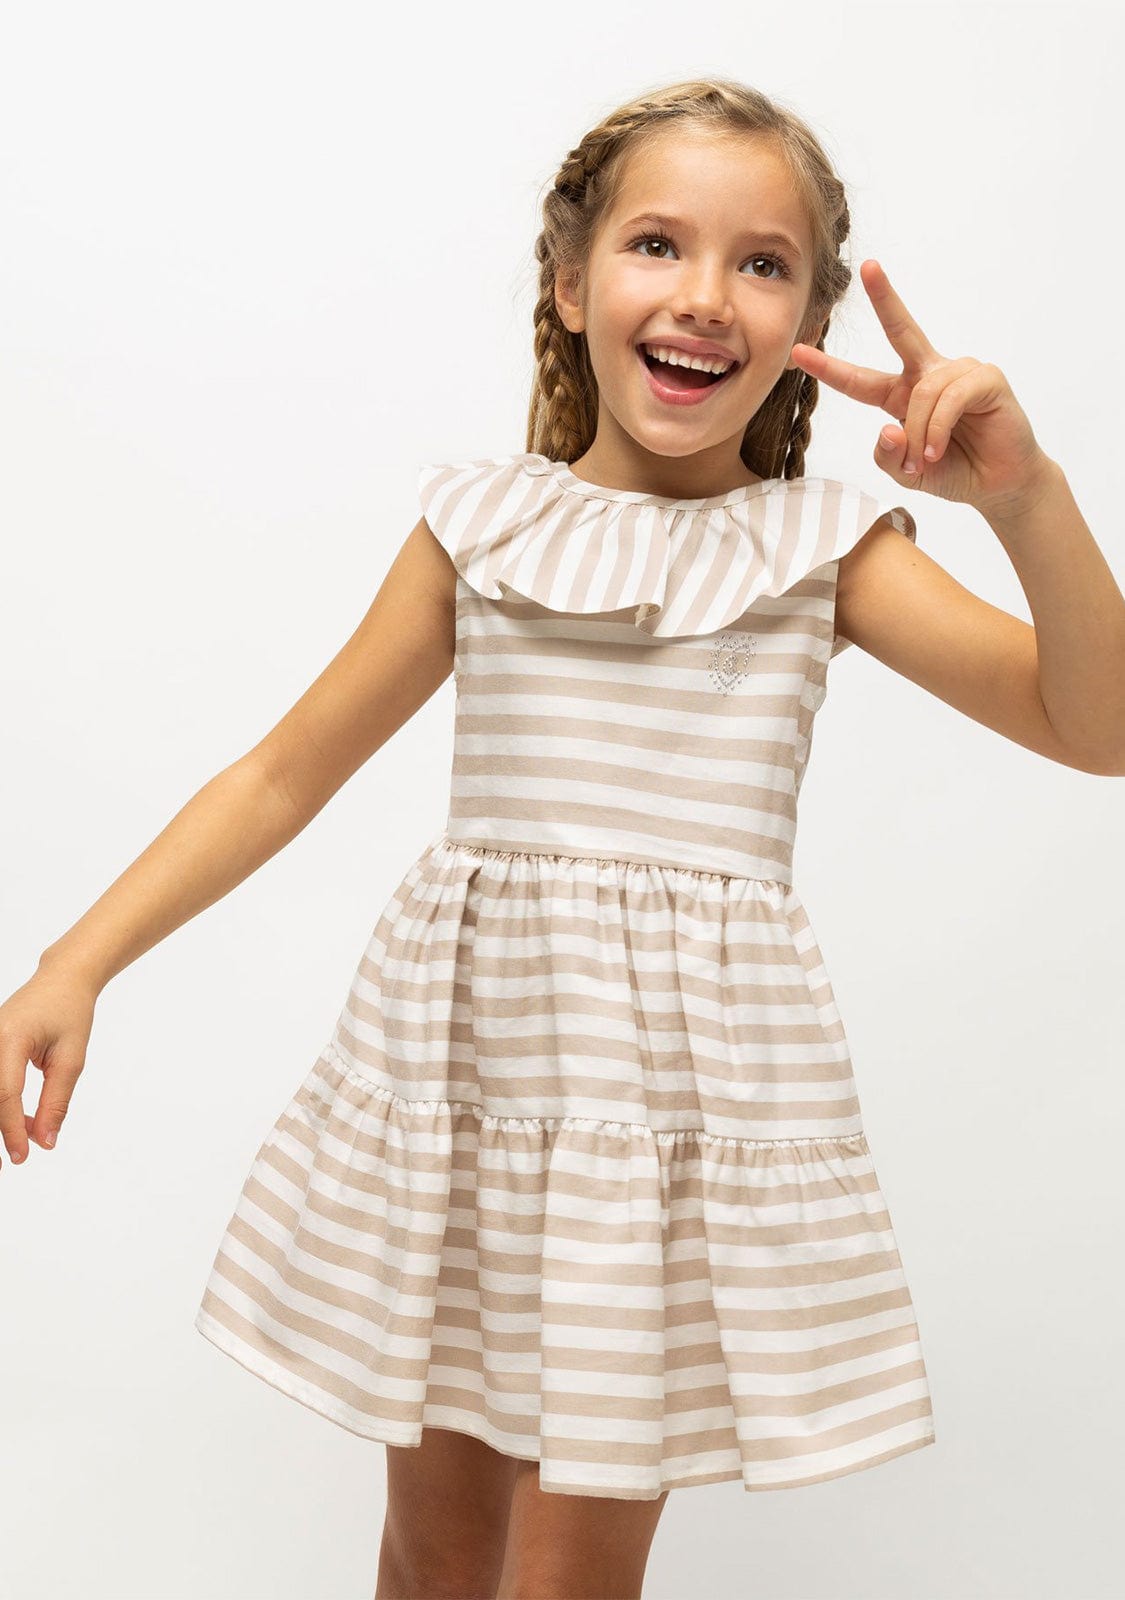 CONGUITOS TEXTIL Clothing Girl's Beige Ruffled Striped Dress